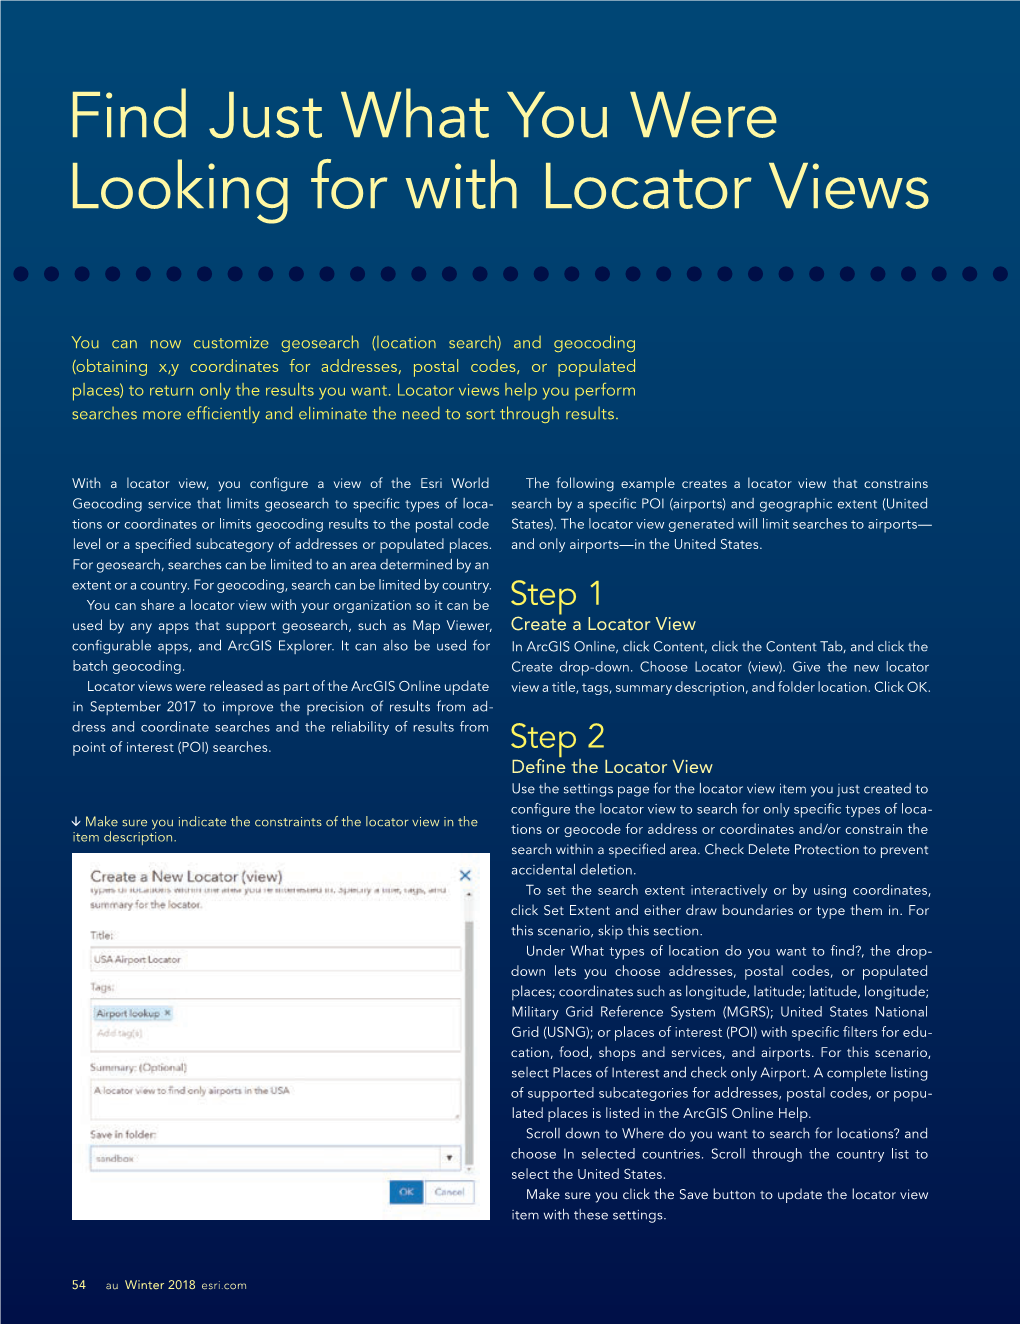 Find Just What You Were Looking for with Locator Views